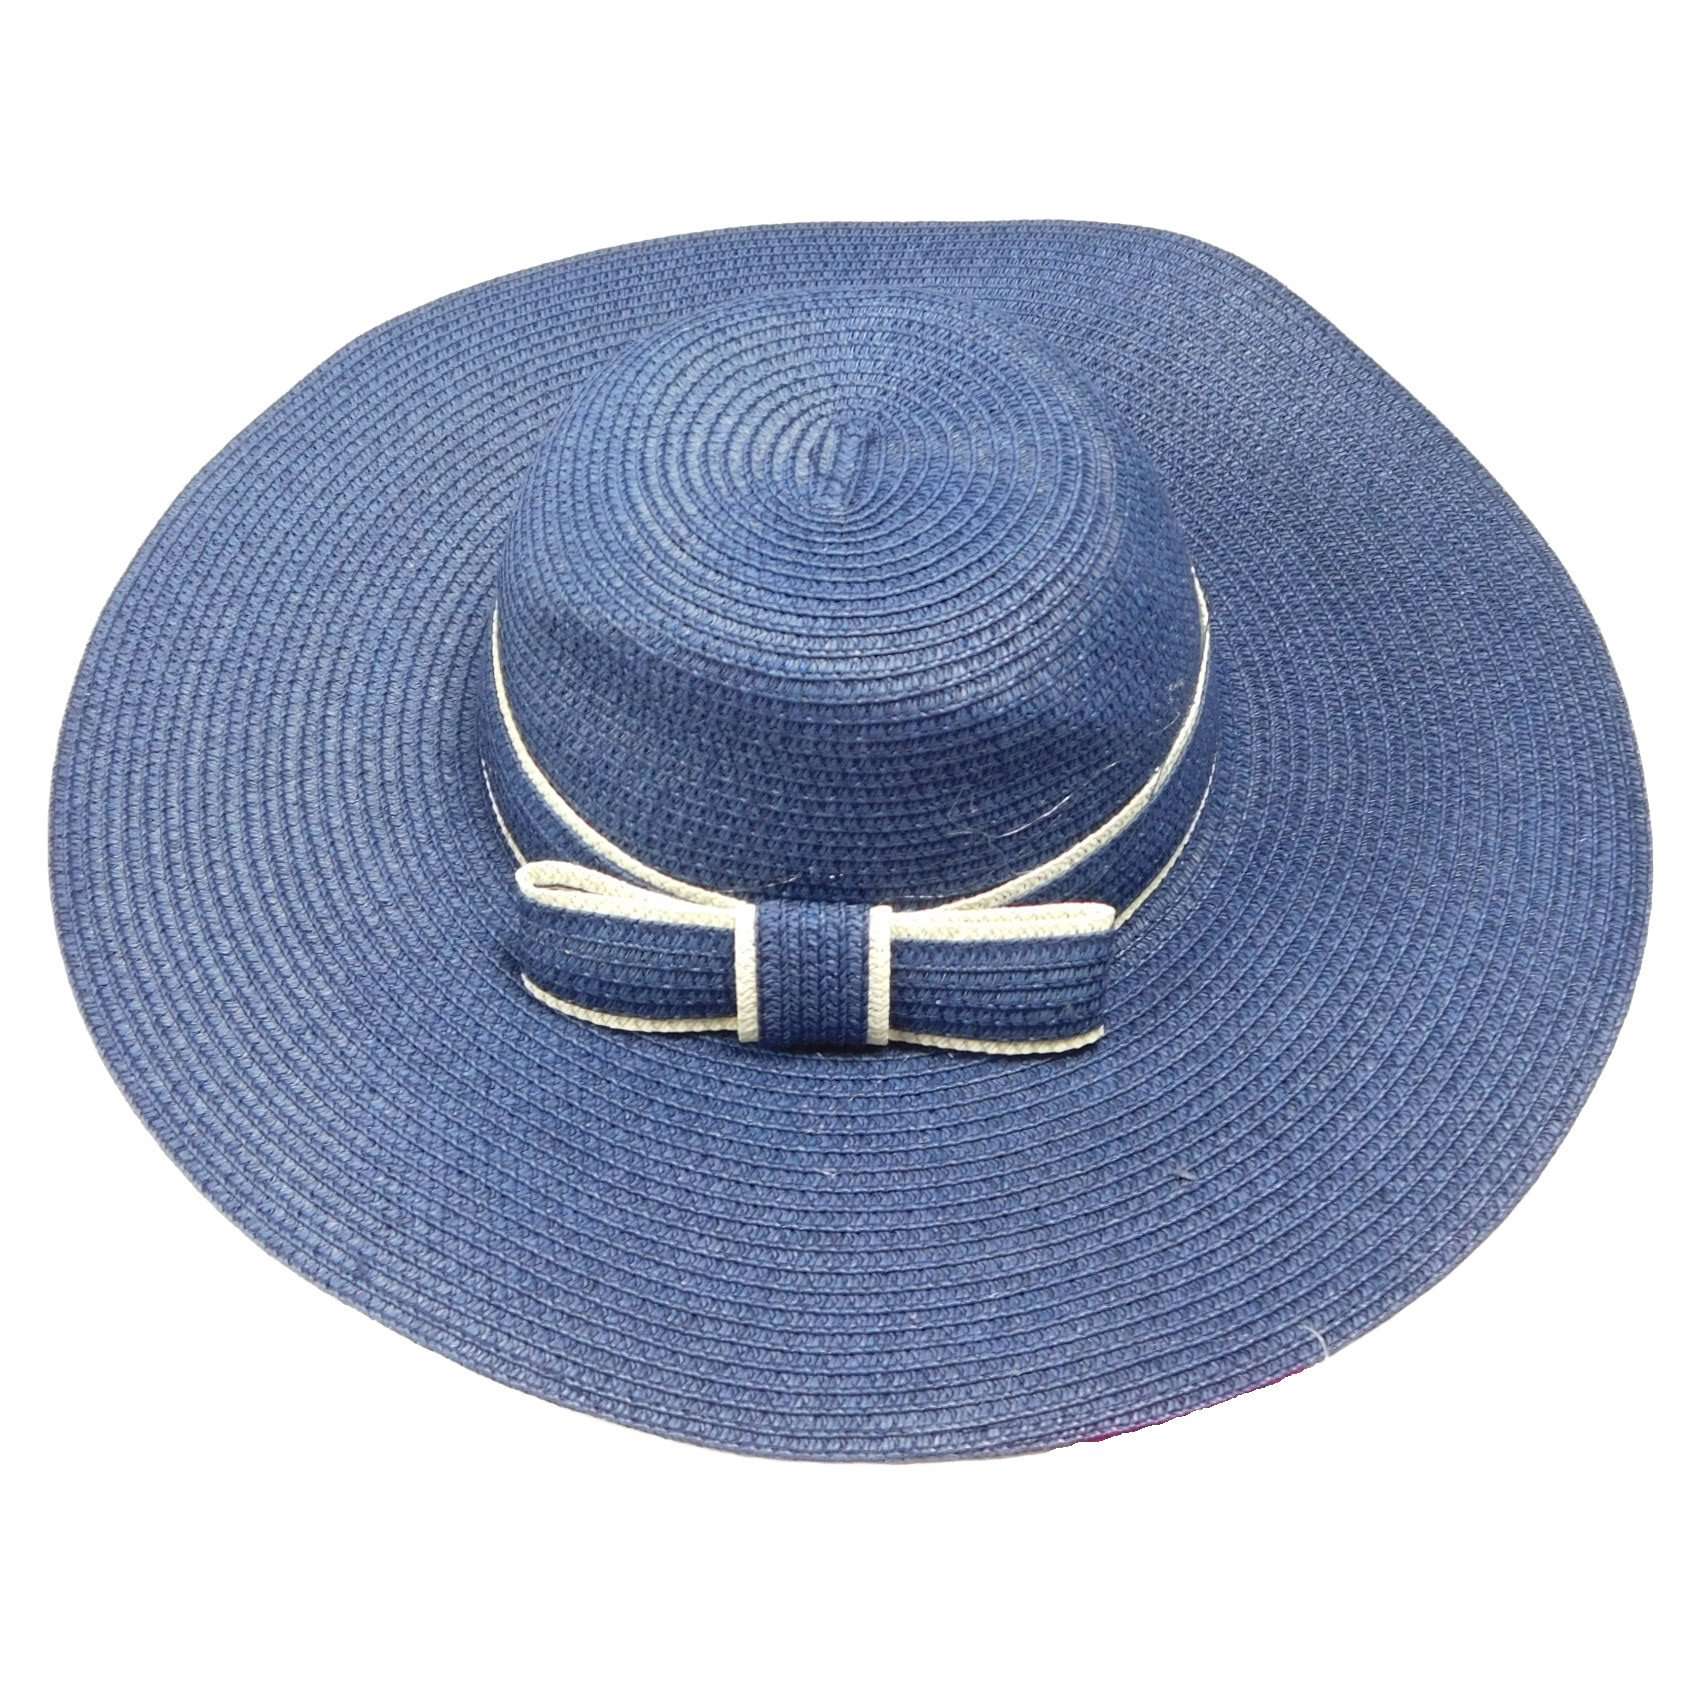 Sun Hat with Bow Detail Floppy Hat Something Special LA WSPS475NV Navy  